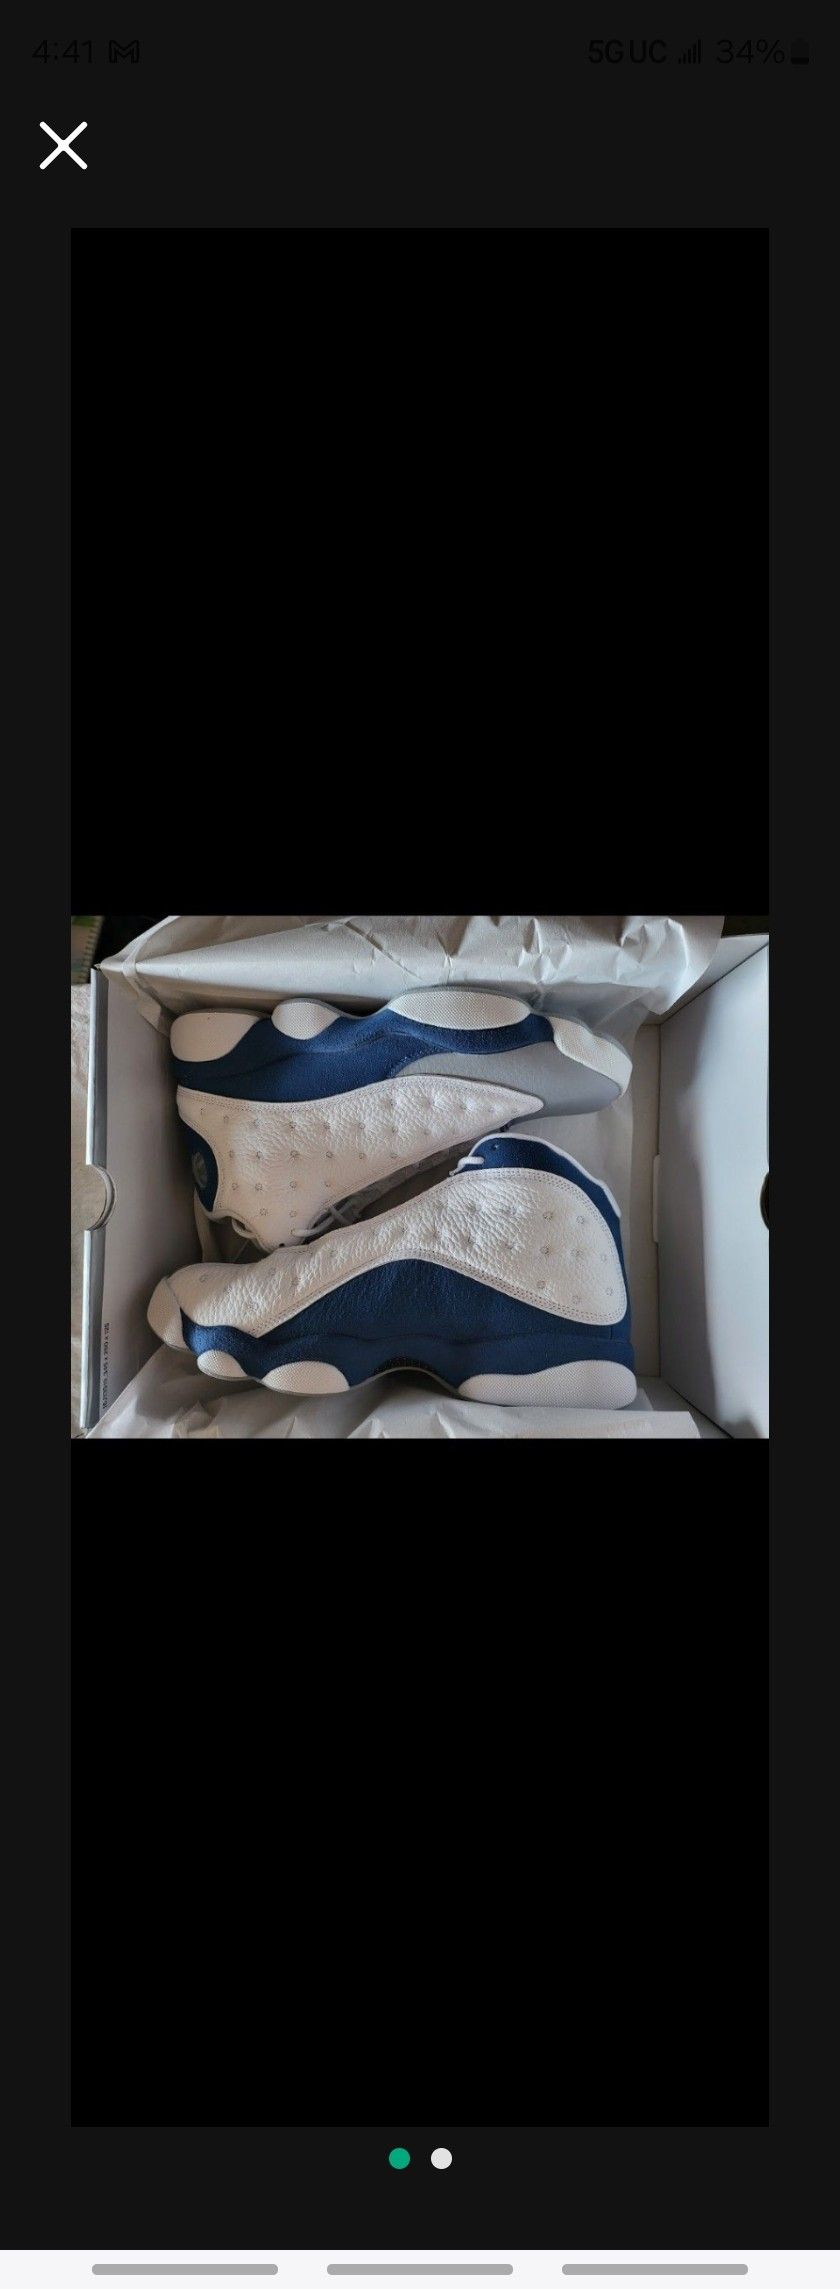 Jordan Retro 13 Size 9.5 Brand New I Have Other Shoes 